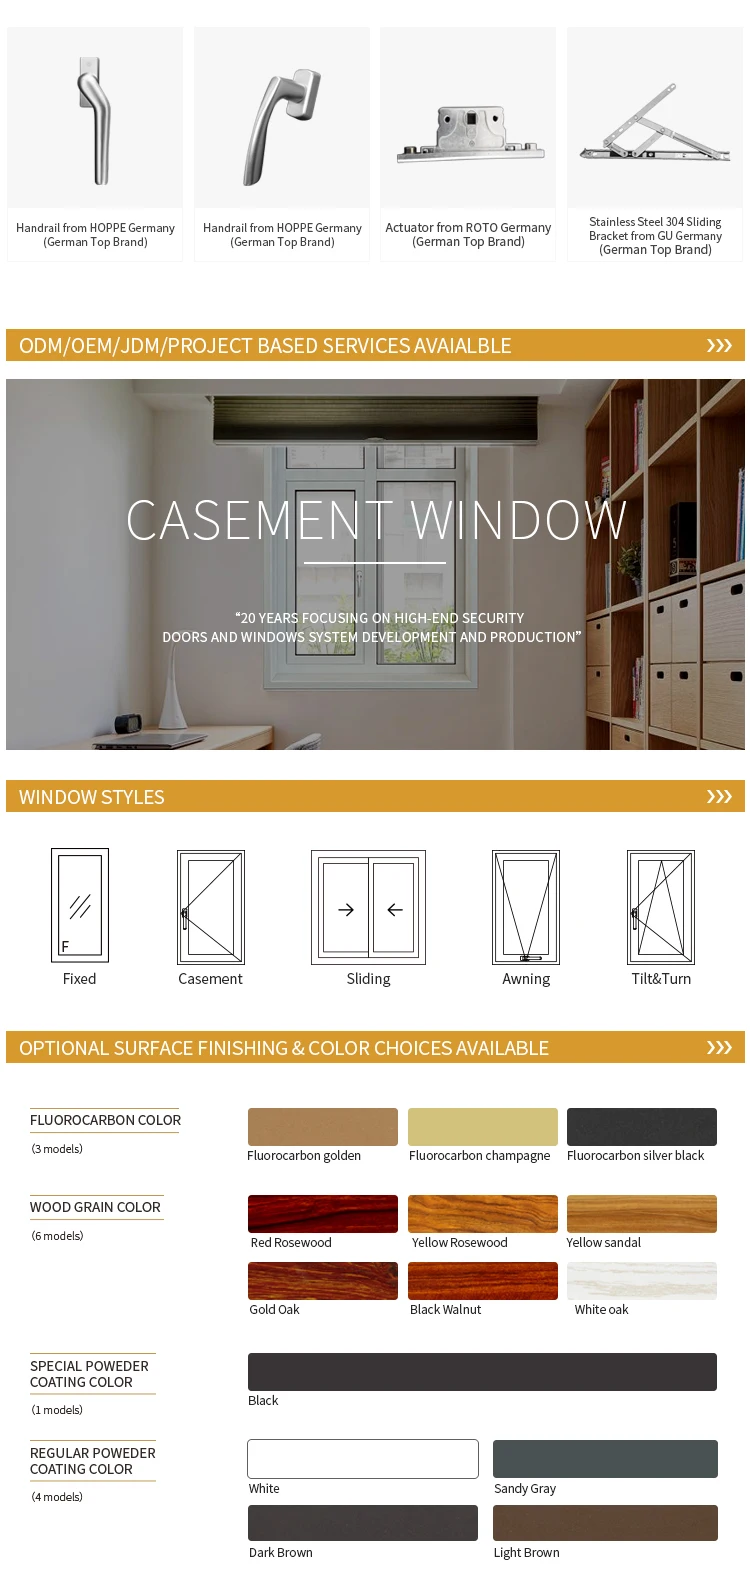 Stained or Painted Wood Grain Interior DJYP W122B Hinged and Retractable Screen Options for Best View Casement Window